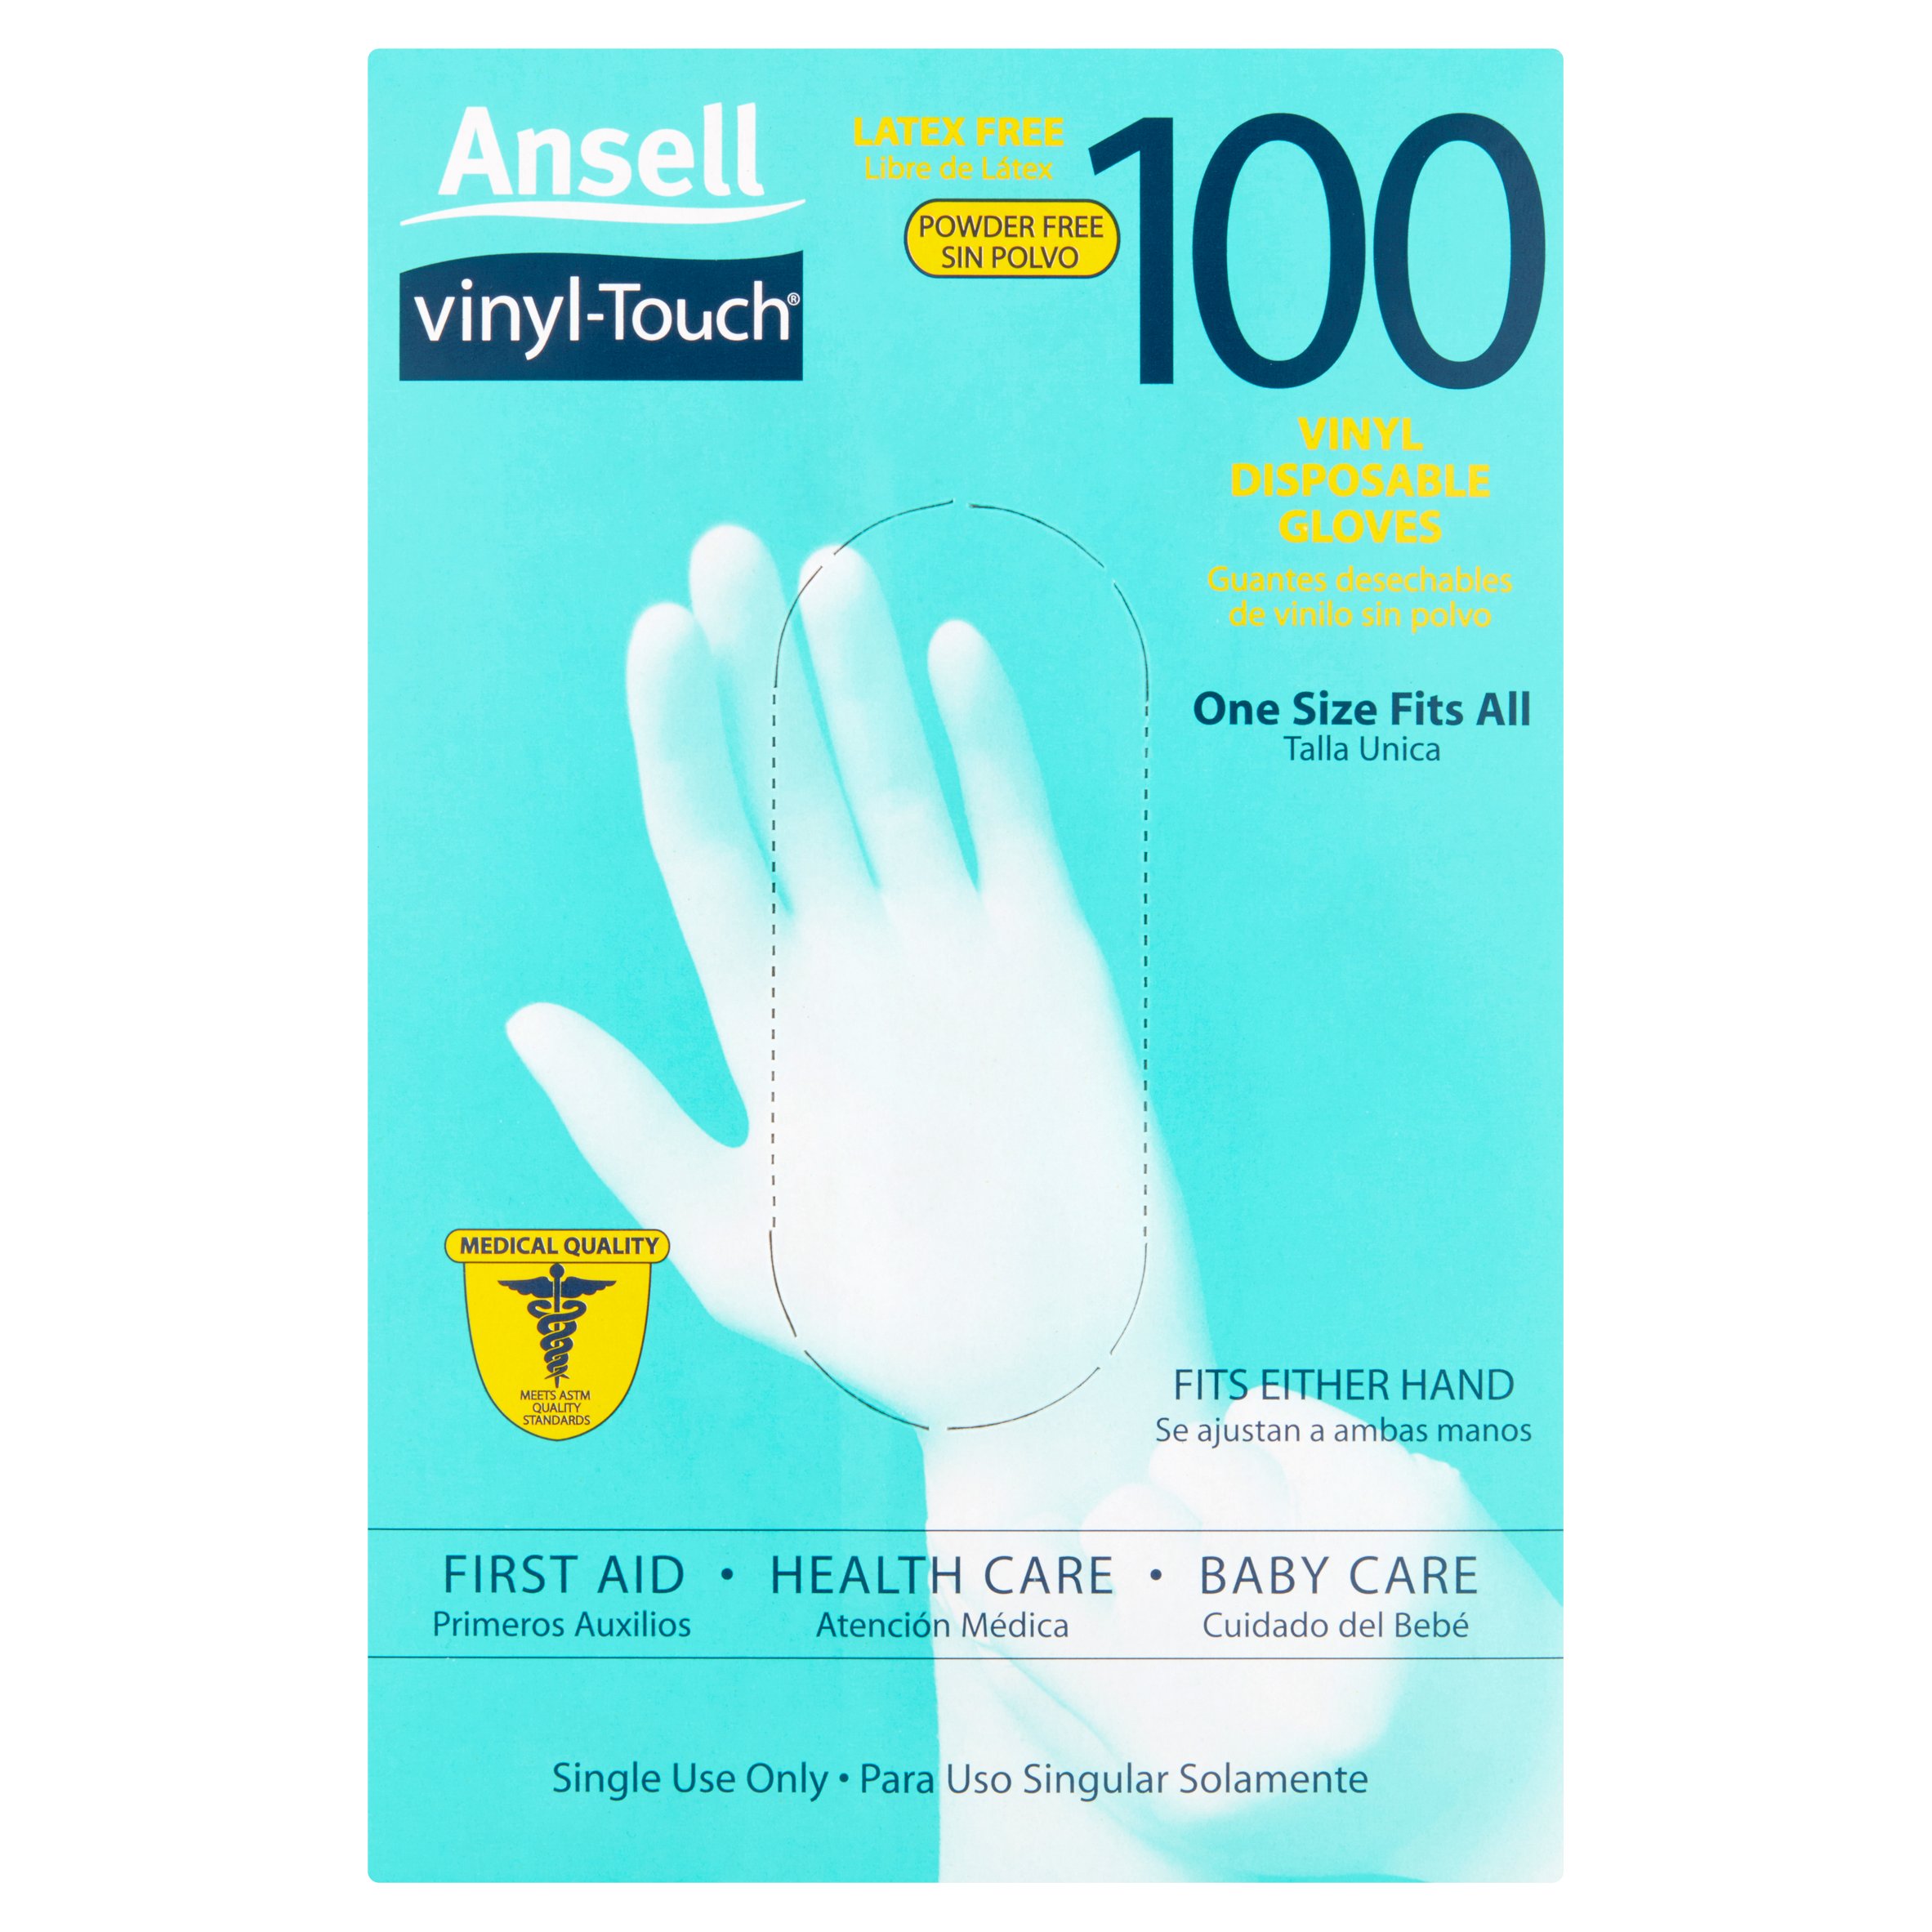 Ansell Vinyl Touch Gloves – Multi-Purpose, Disposable, Latex-Free, One Size Fits All! 100ct Gloves - image 3 of 4